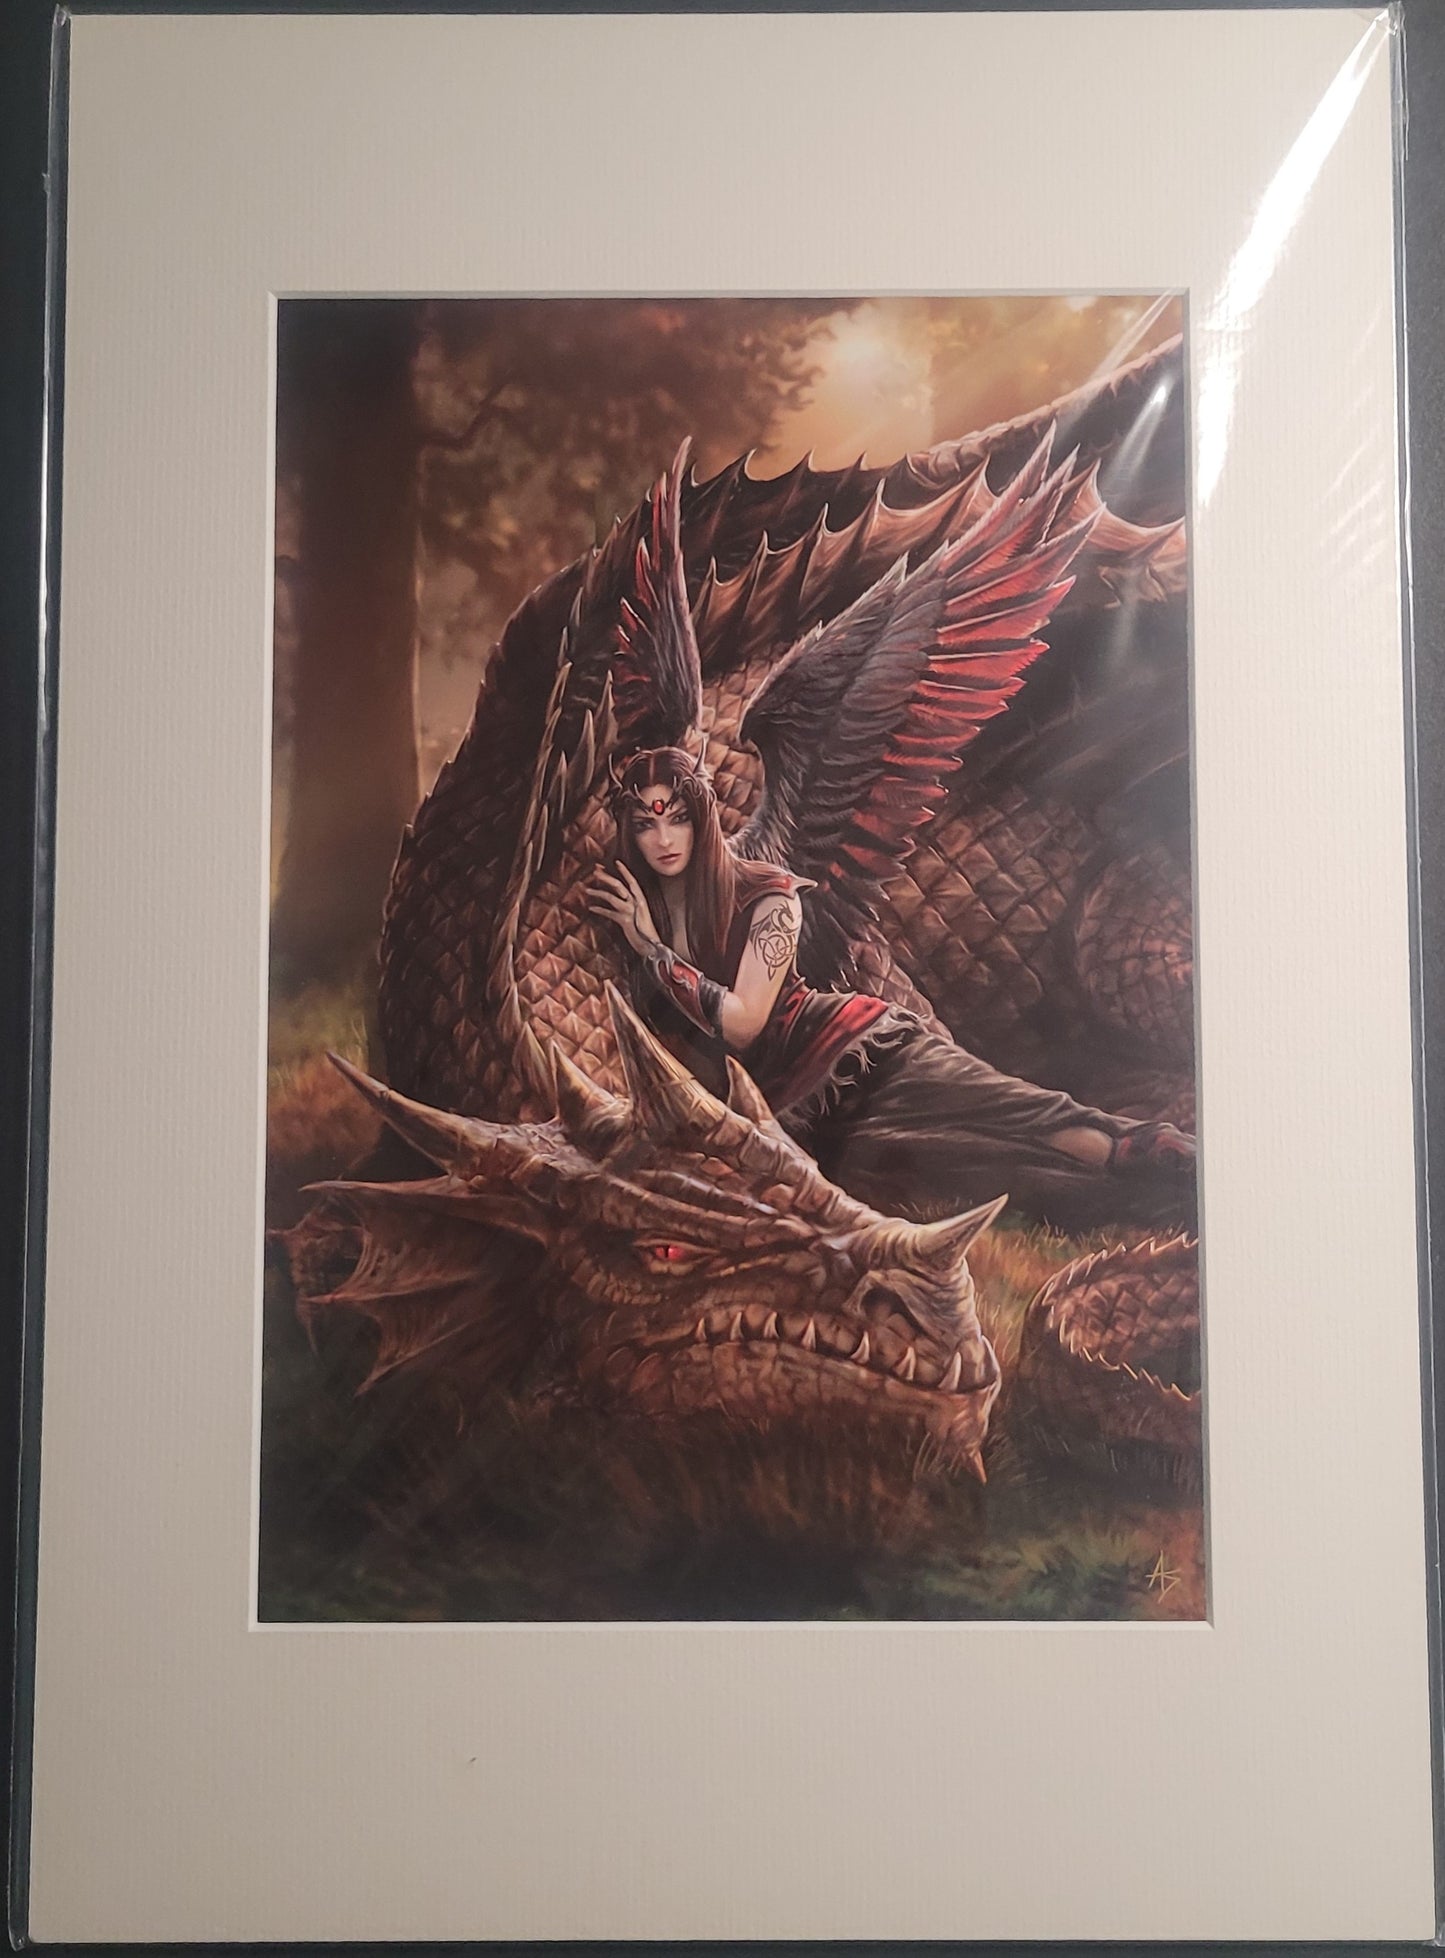 Winged Companions by Anne Stokes, Mounted Prints